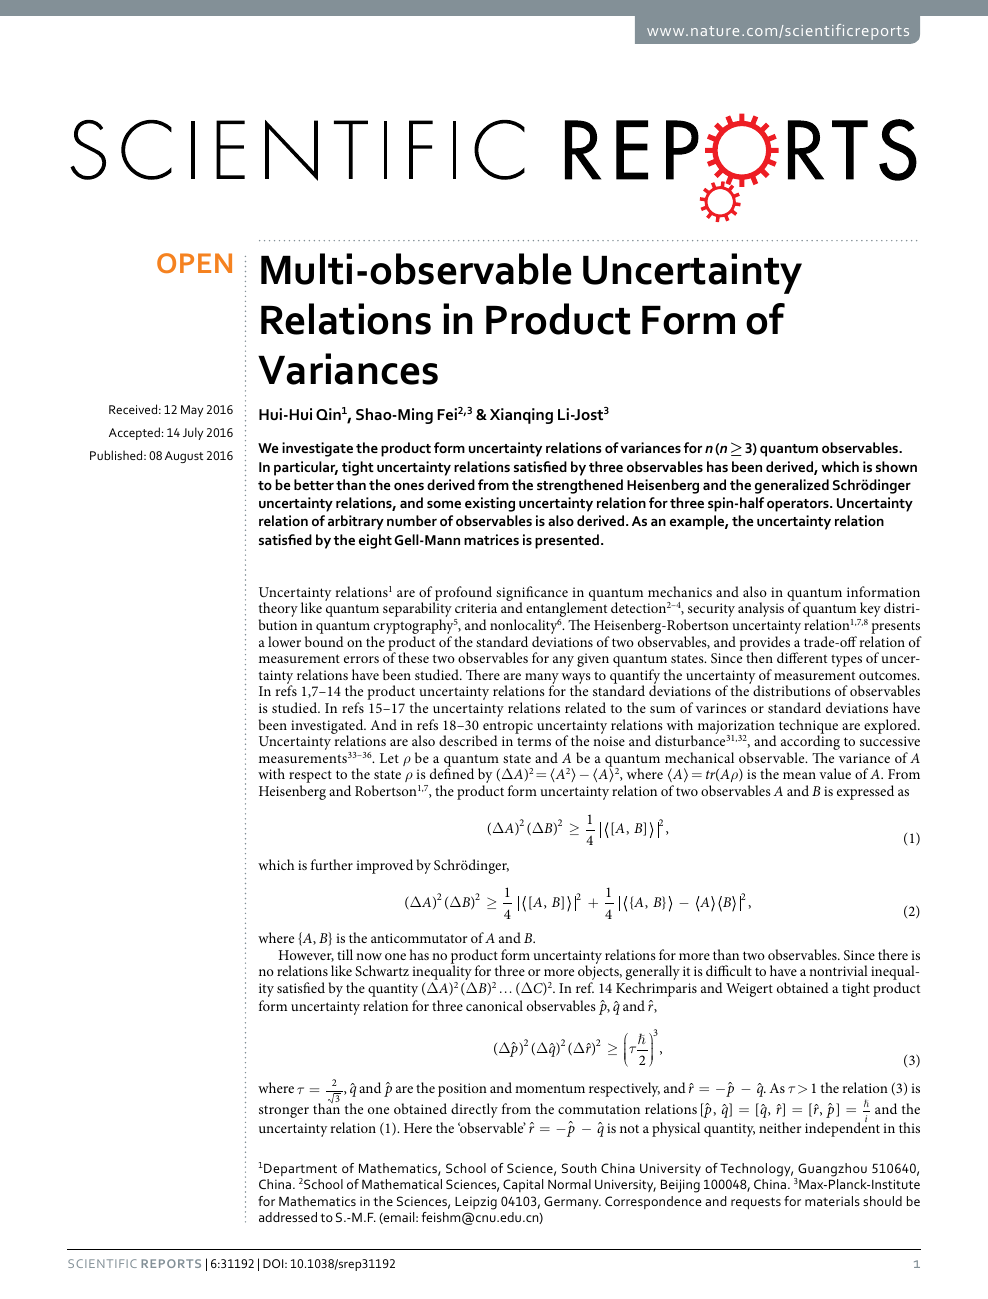 Multi Observable Uncertainty Relations In Product Form Of Variances Topic Of Research Paper In Physical Sciences Download Scholarly Article Pdf And Read For Free On Cyberleninka Open Science Hub